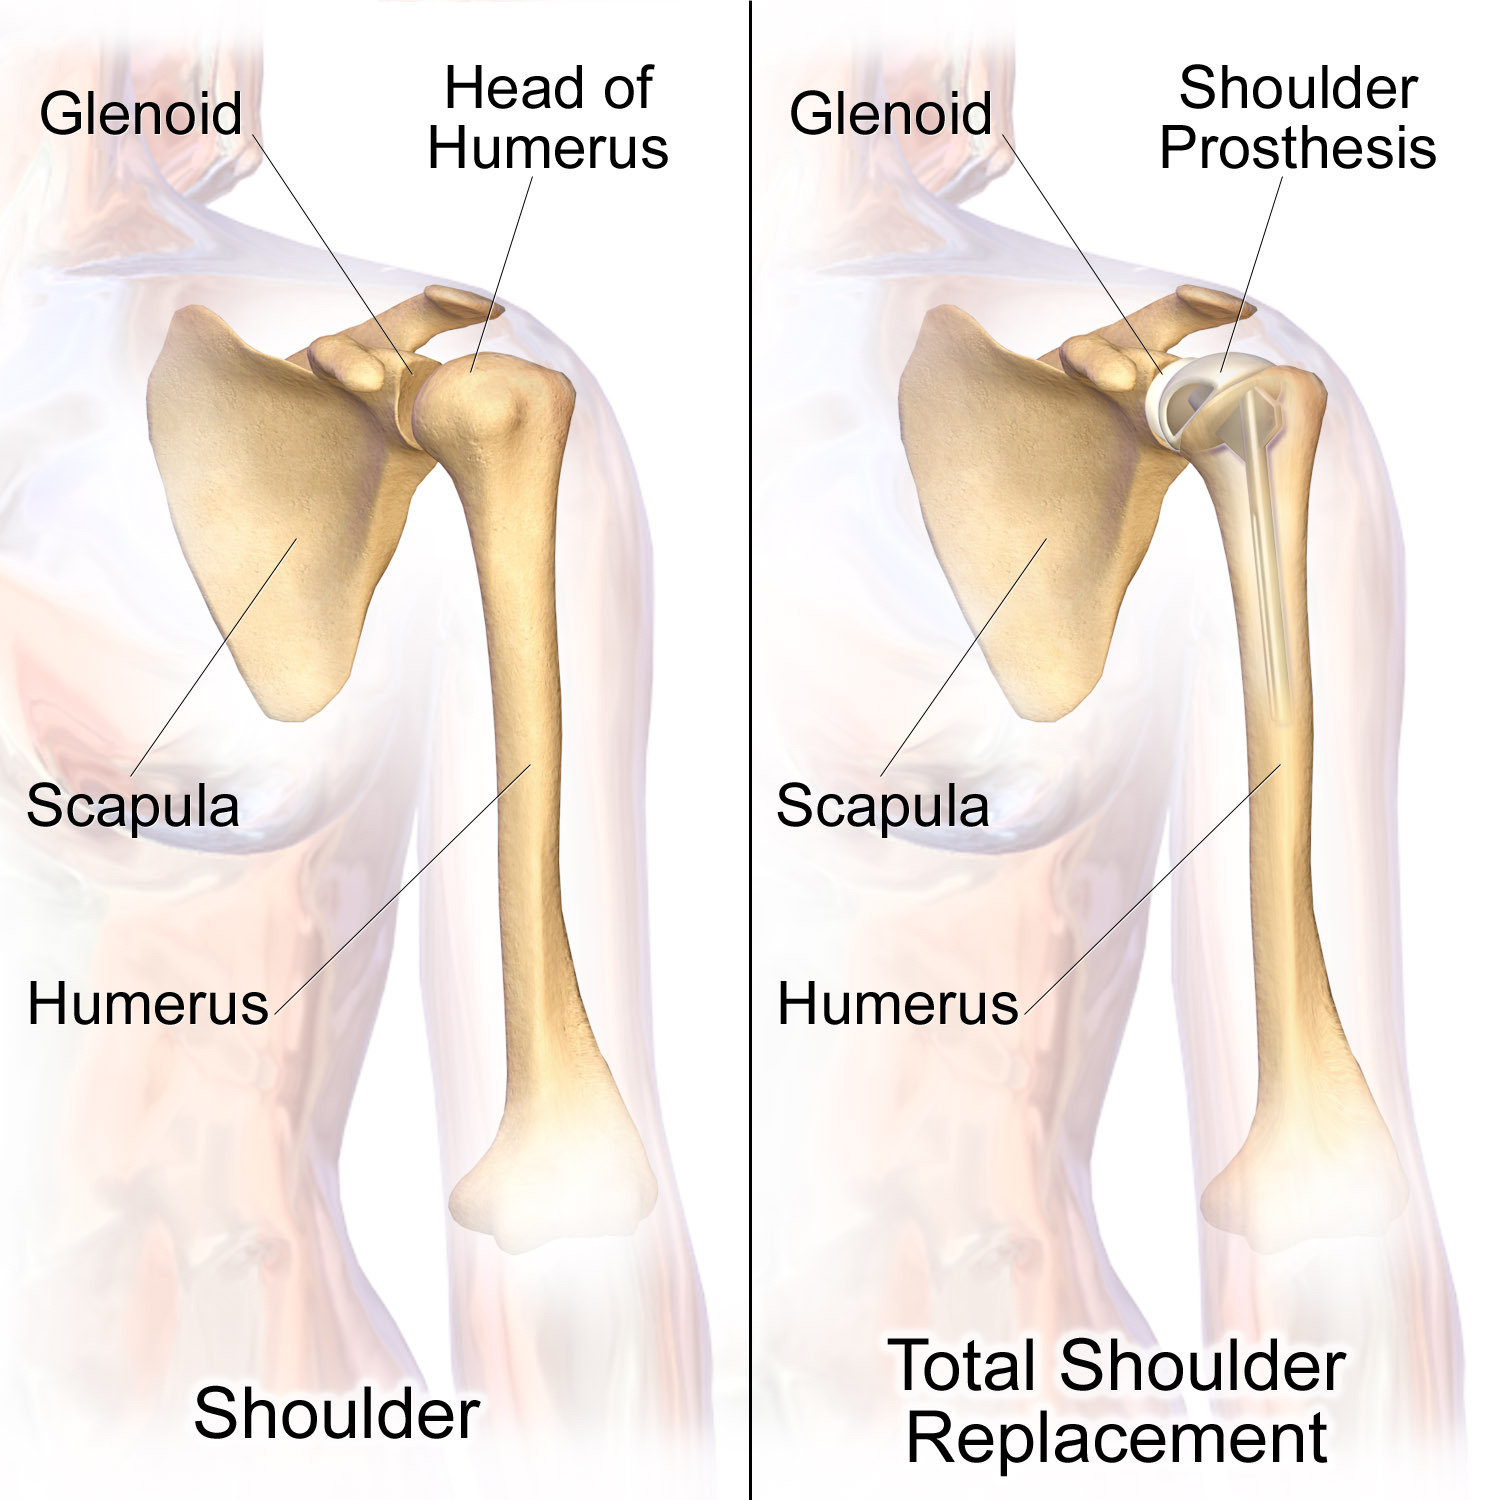 Shoulder Replacement Surgery Results in Old vs. Young Patients